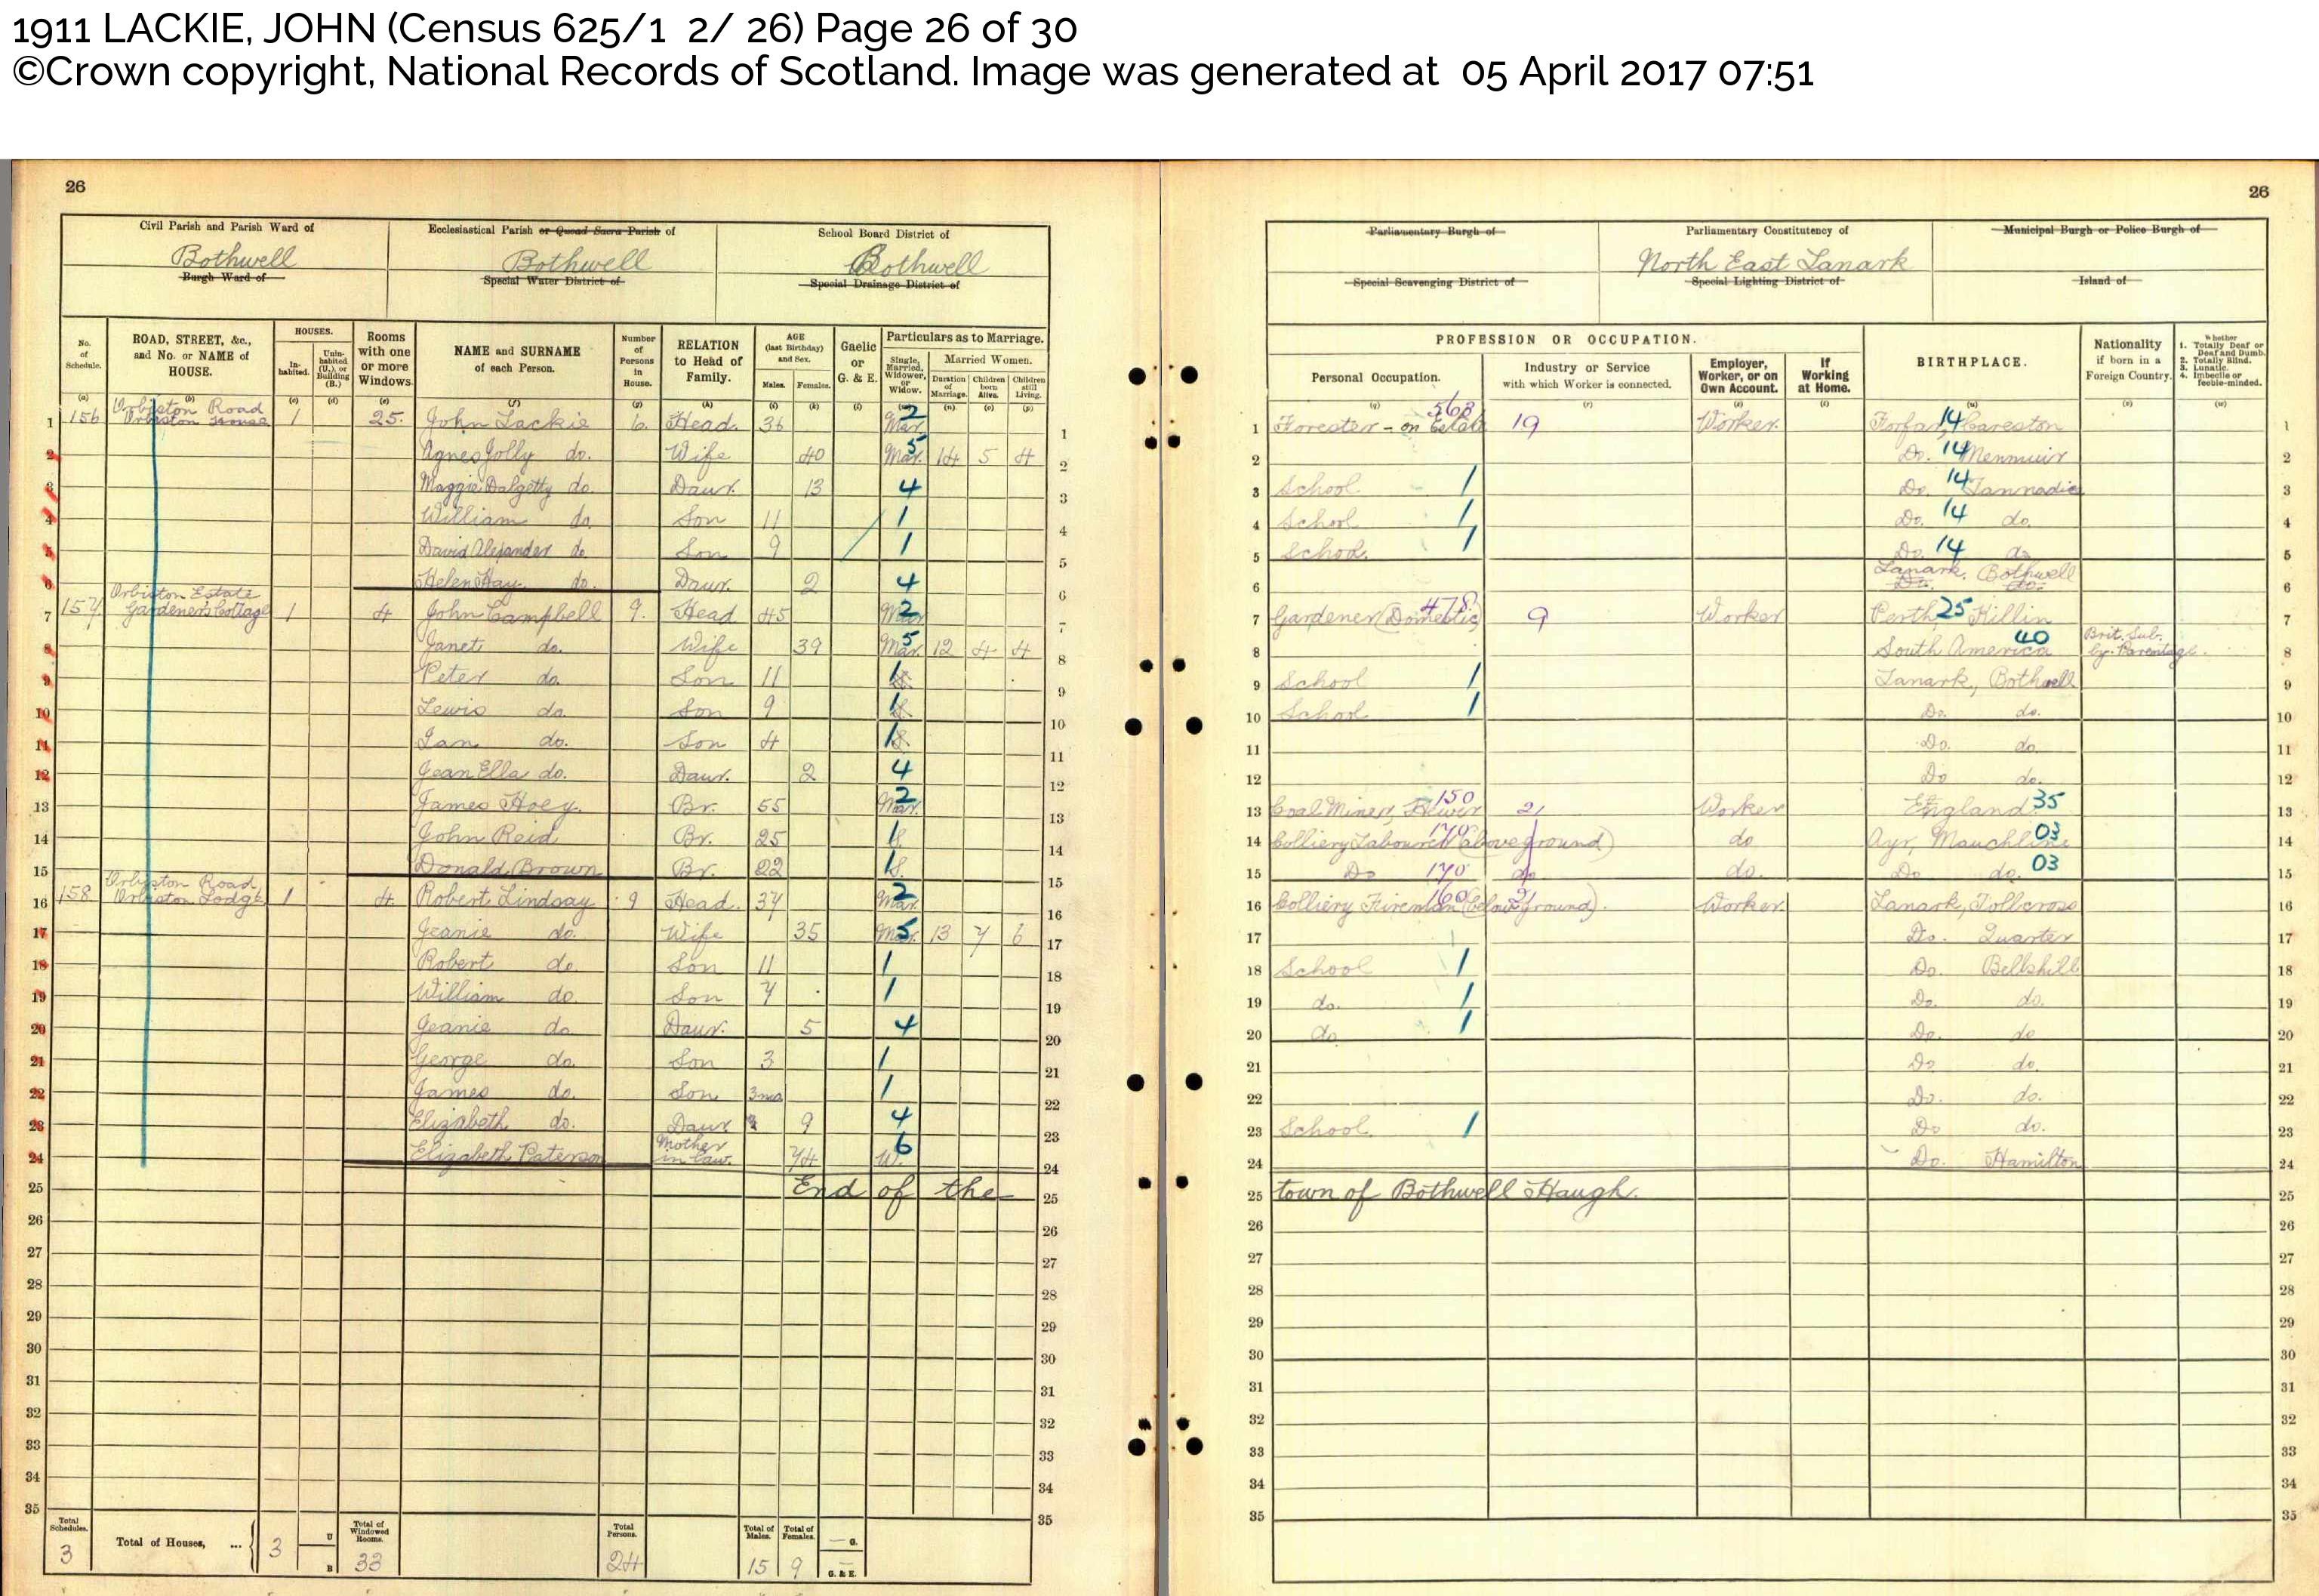 1911 Scotland Census, February 4, 1911, Linked To: <a href='i12151.html' >Maggie Dalgetty Lackie</a>